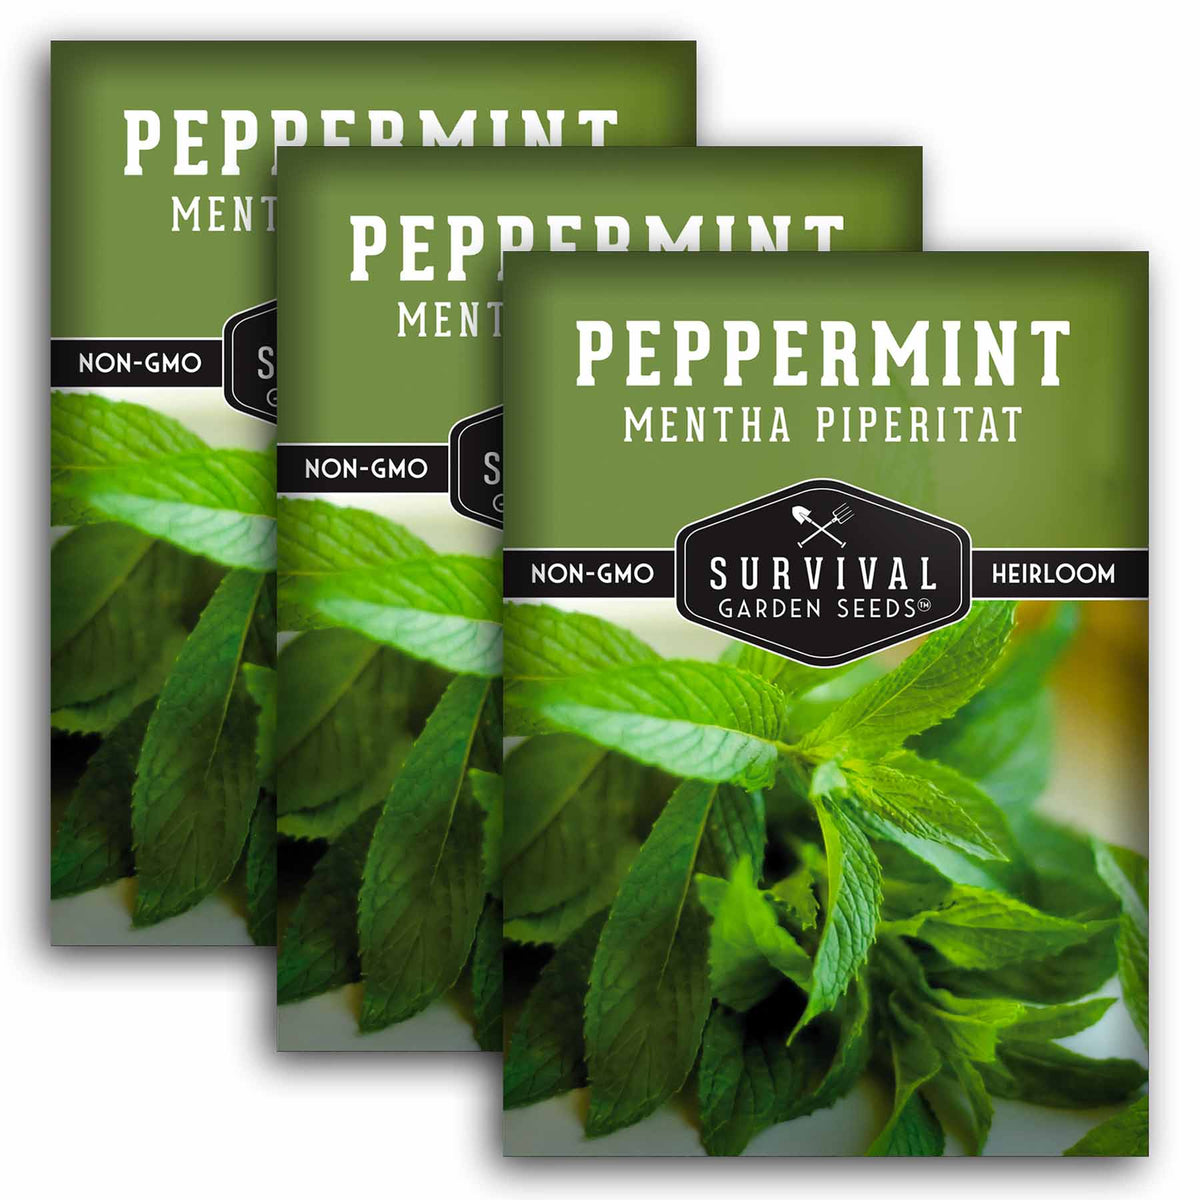 3 packets of peppermint seeds